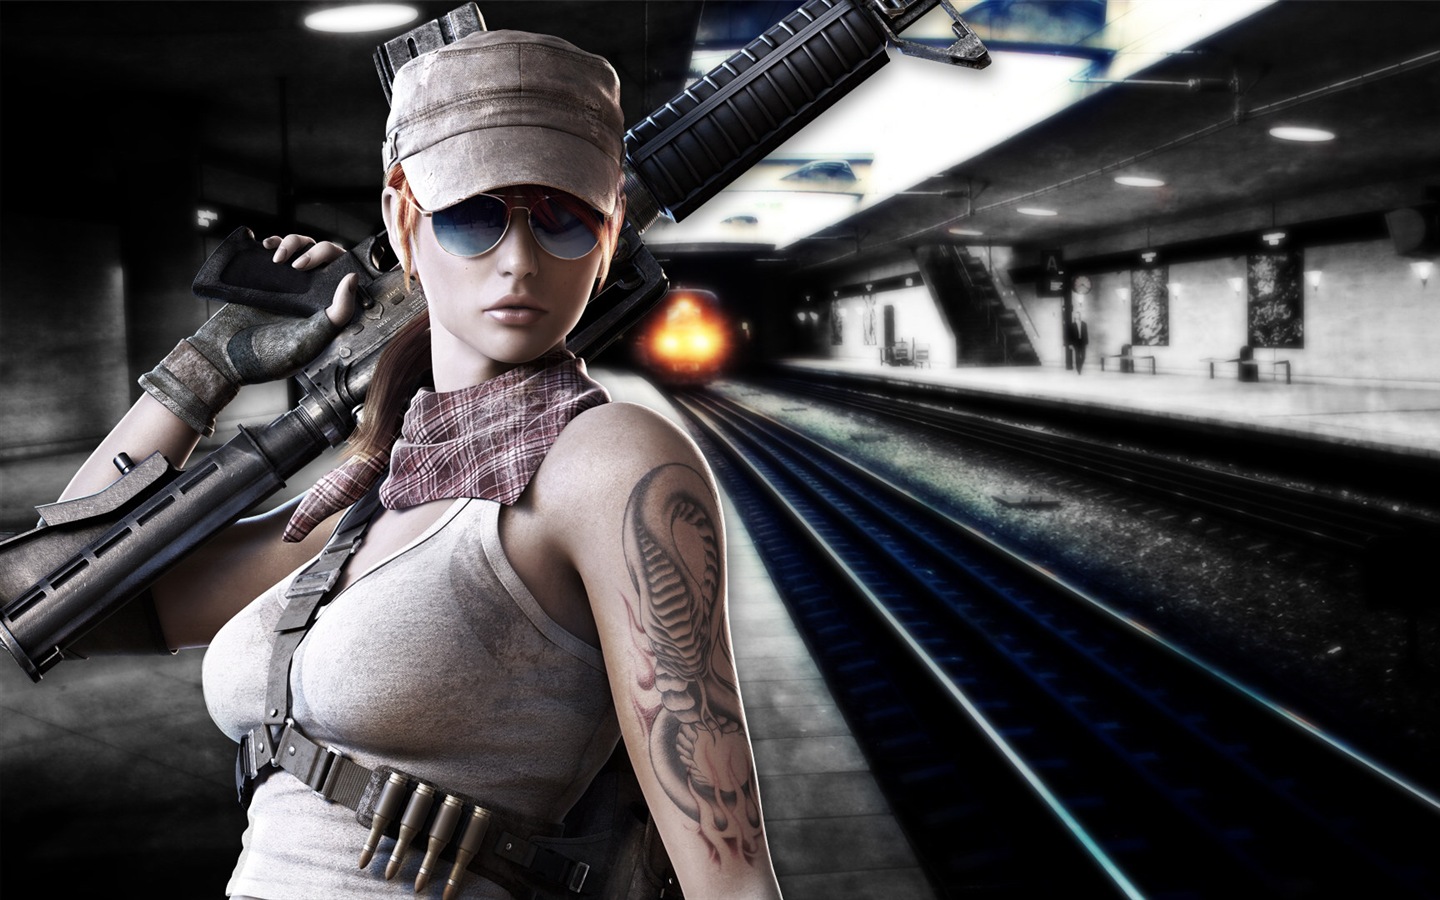 Point Blank HD game wallpapers #7 - 1440x900